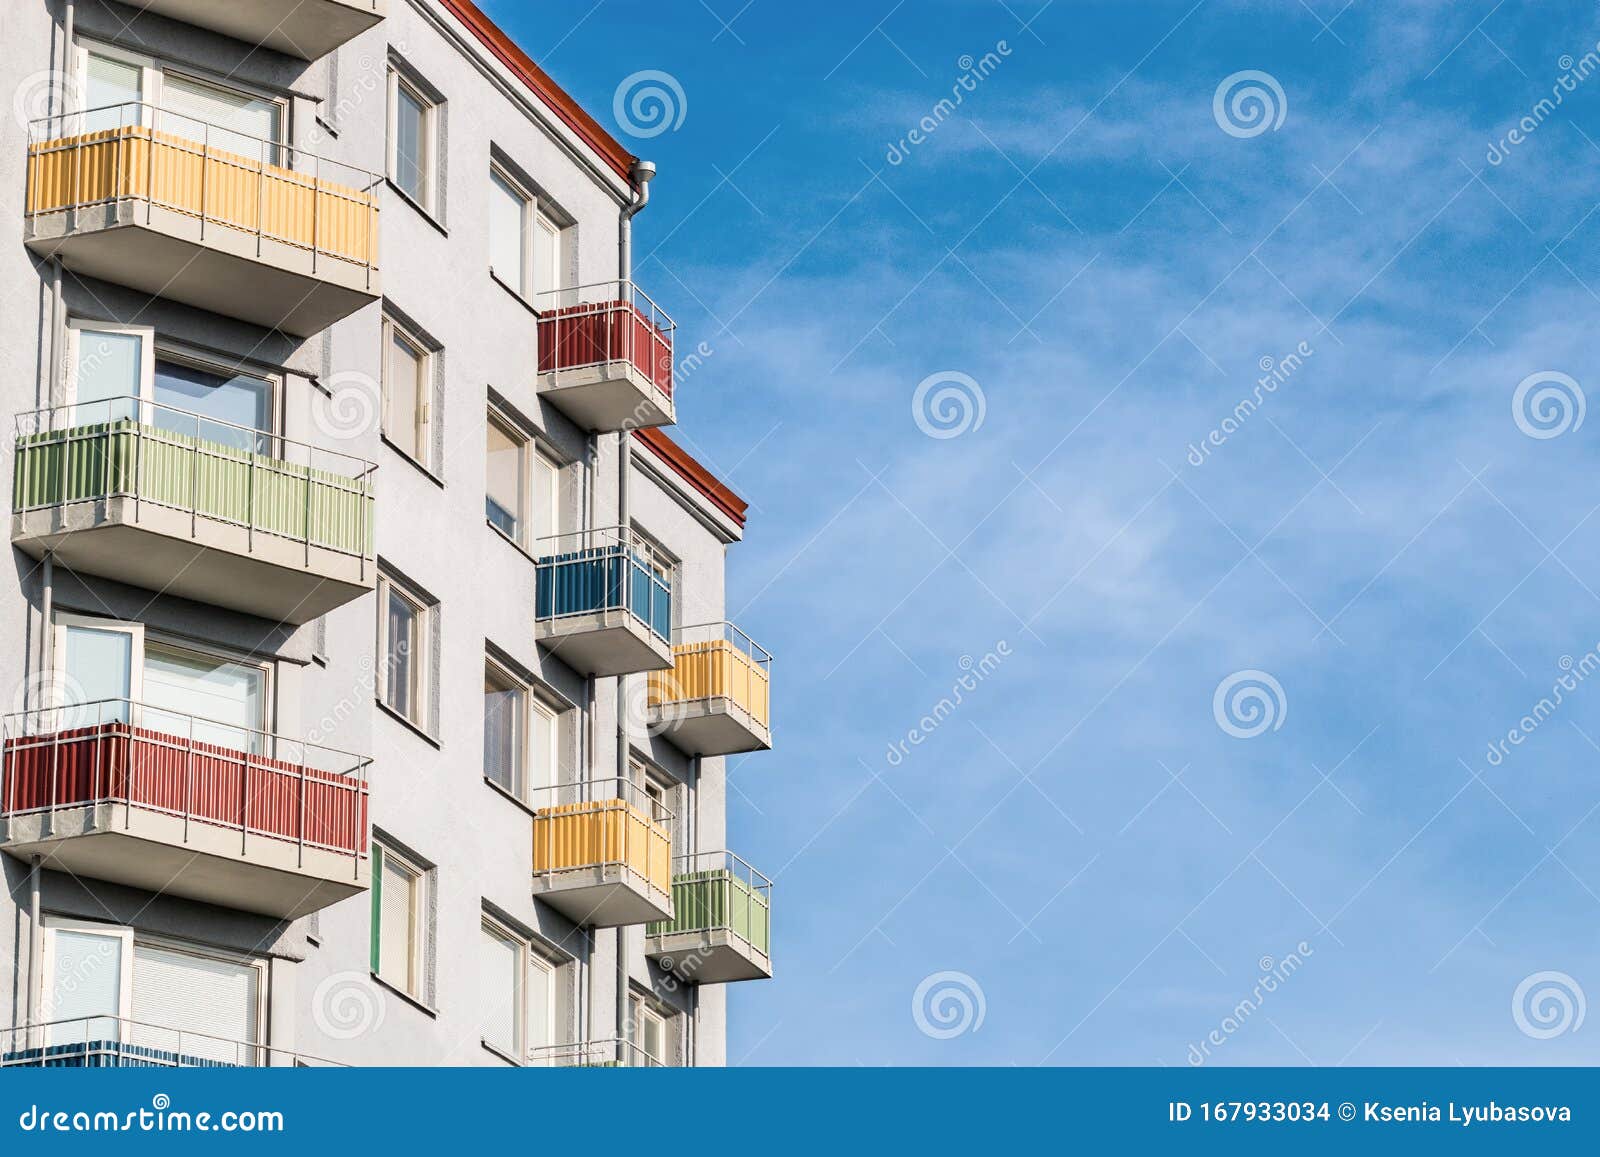 Colorful Building and Bright Blue Sky Poster